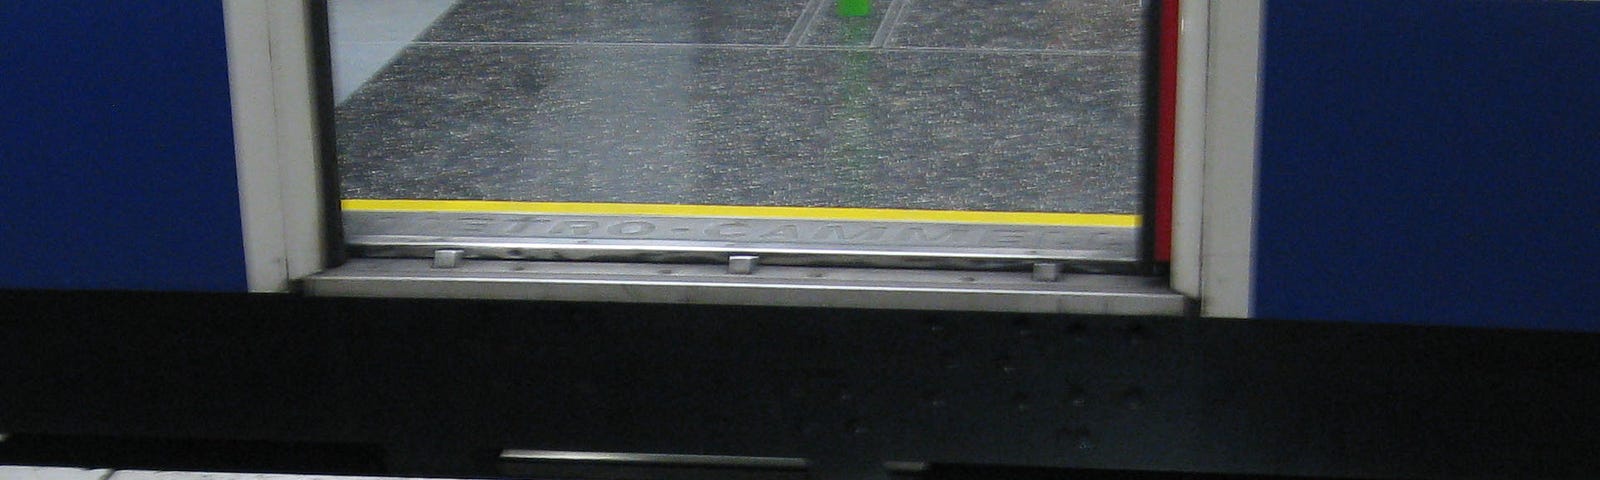 Image of an open door of a subway car with the door a few inches off from the station level and tiles spelling out mind the gap.